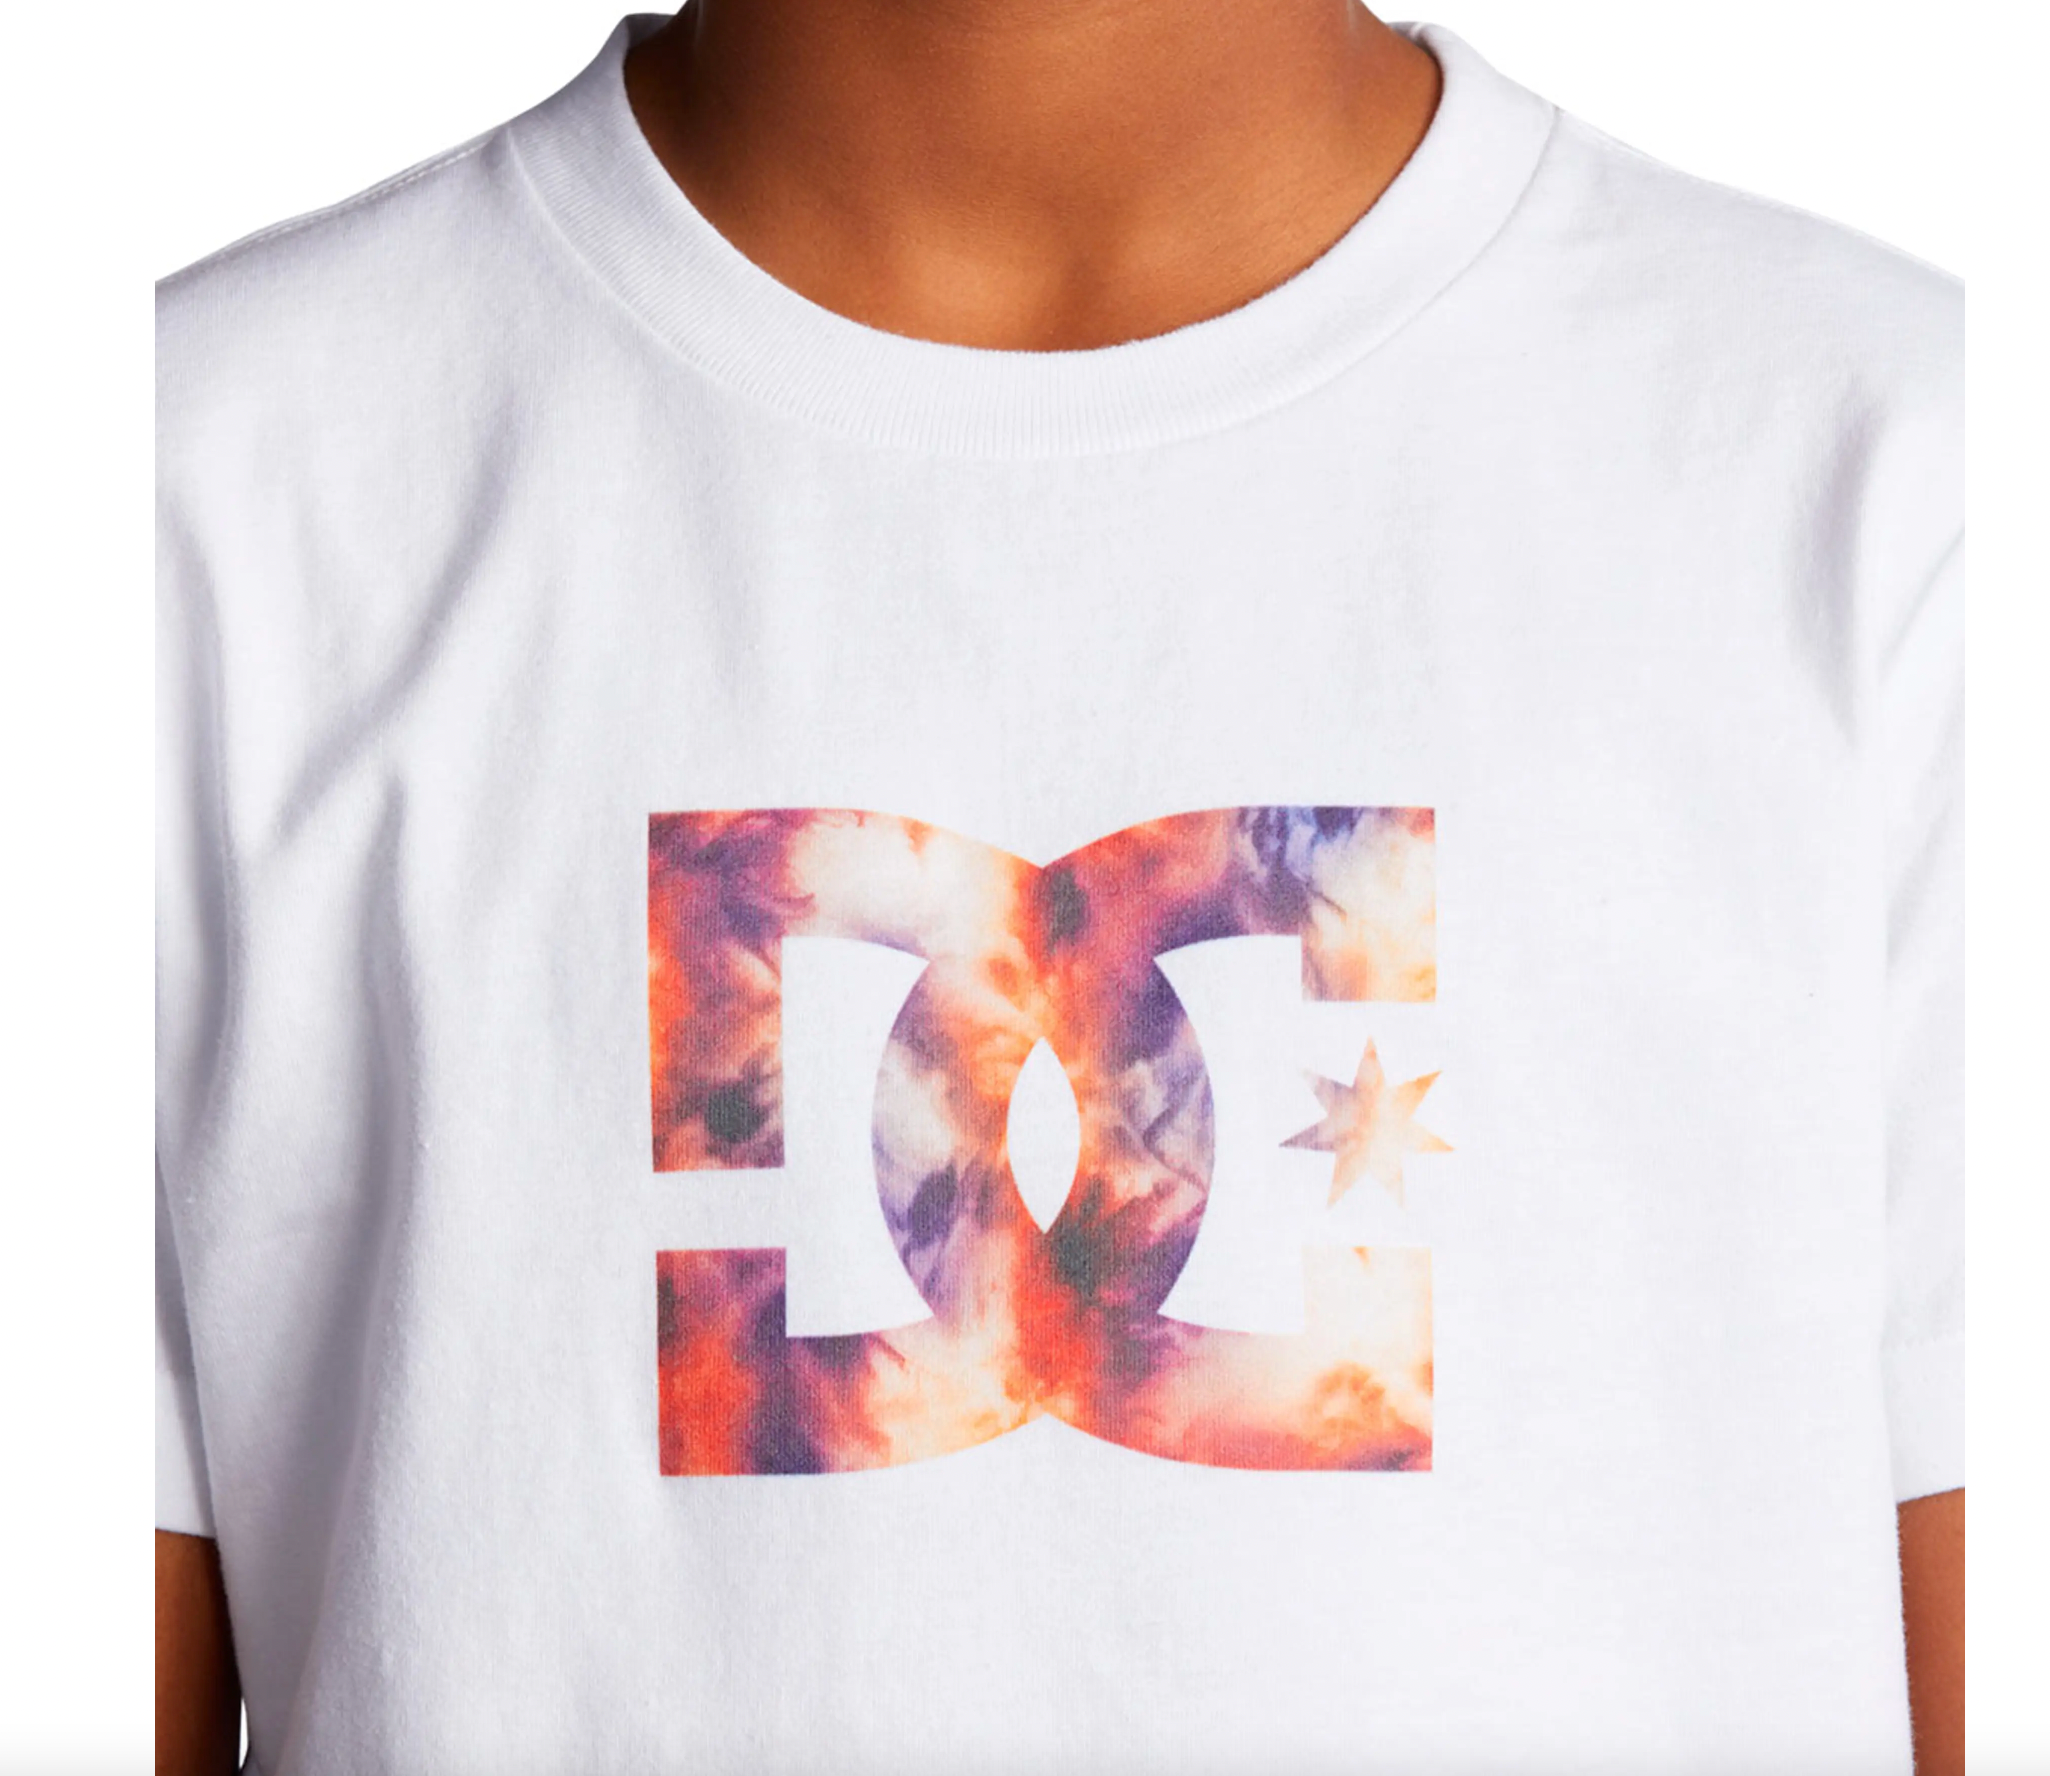 DC Shoes Star Fill Short Sleeve T-Shirt White Red Lilac Kids